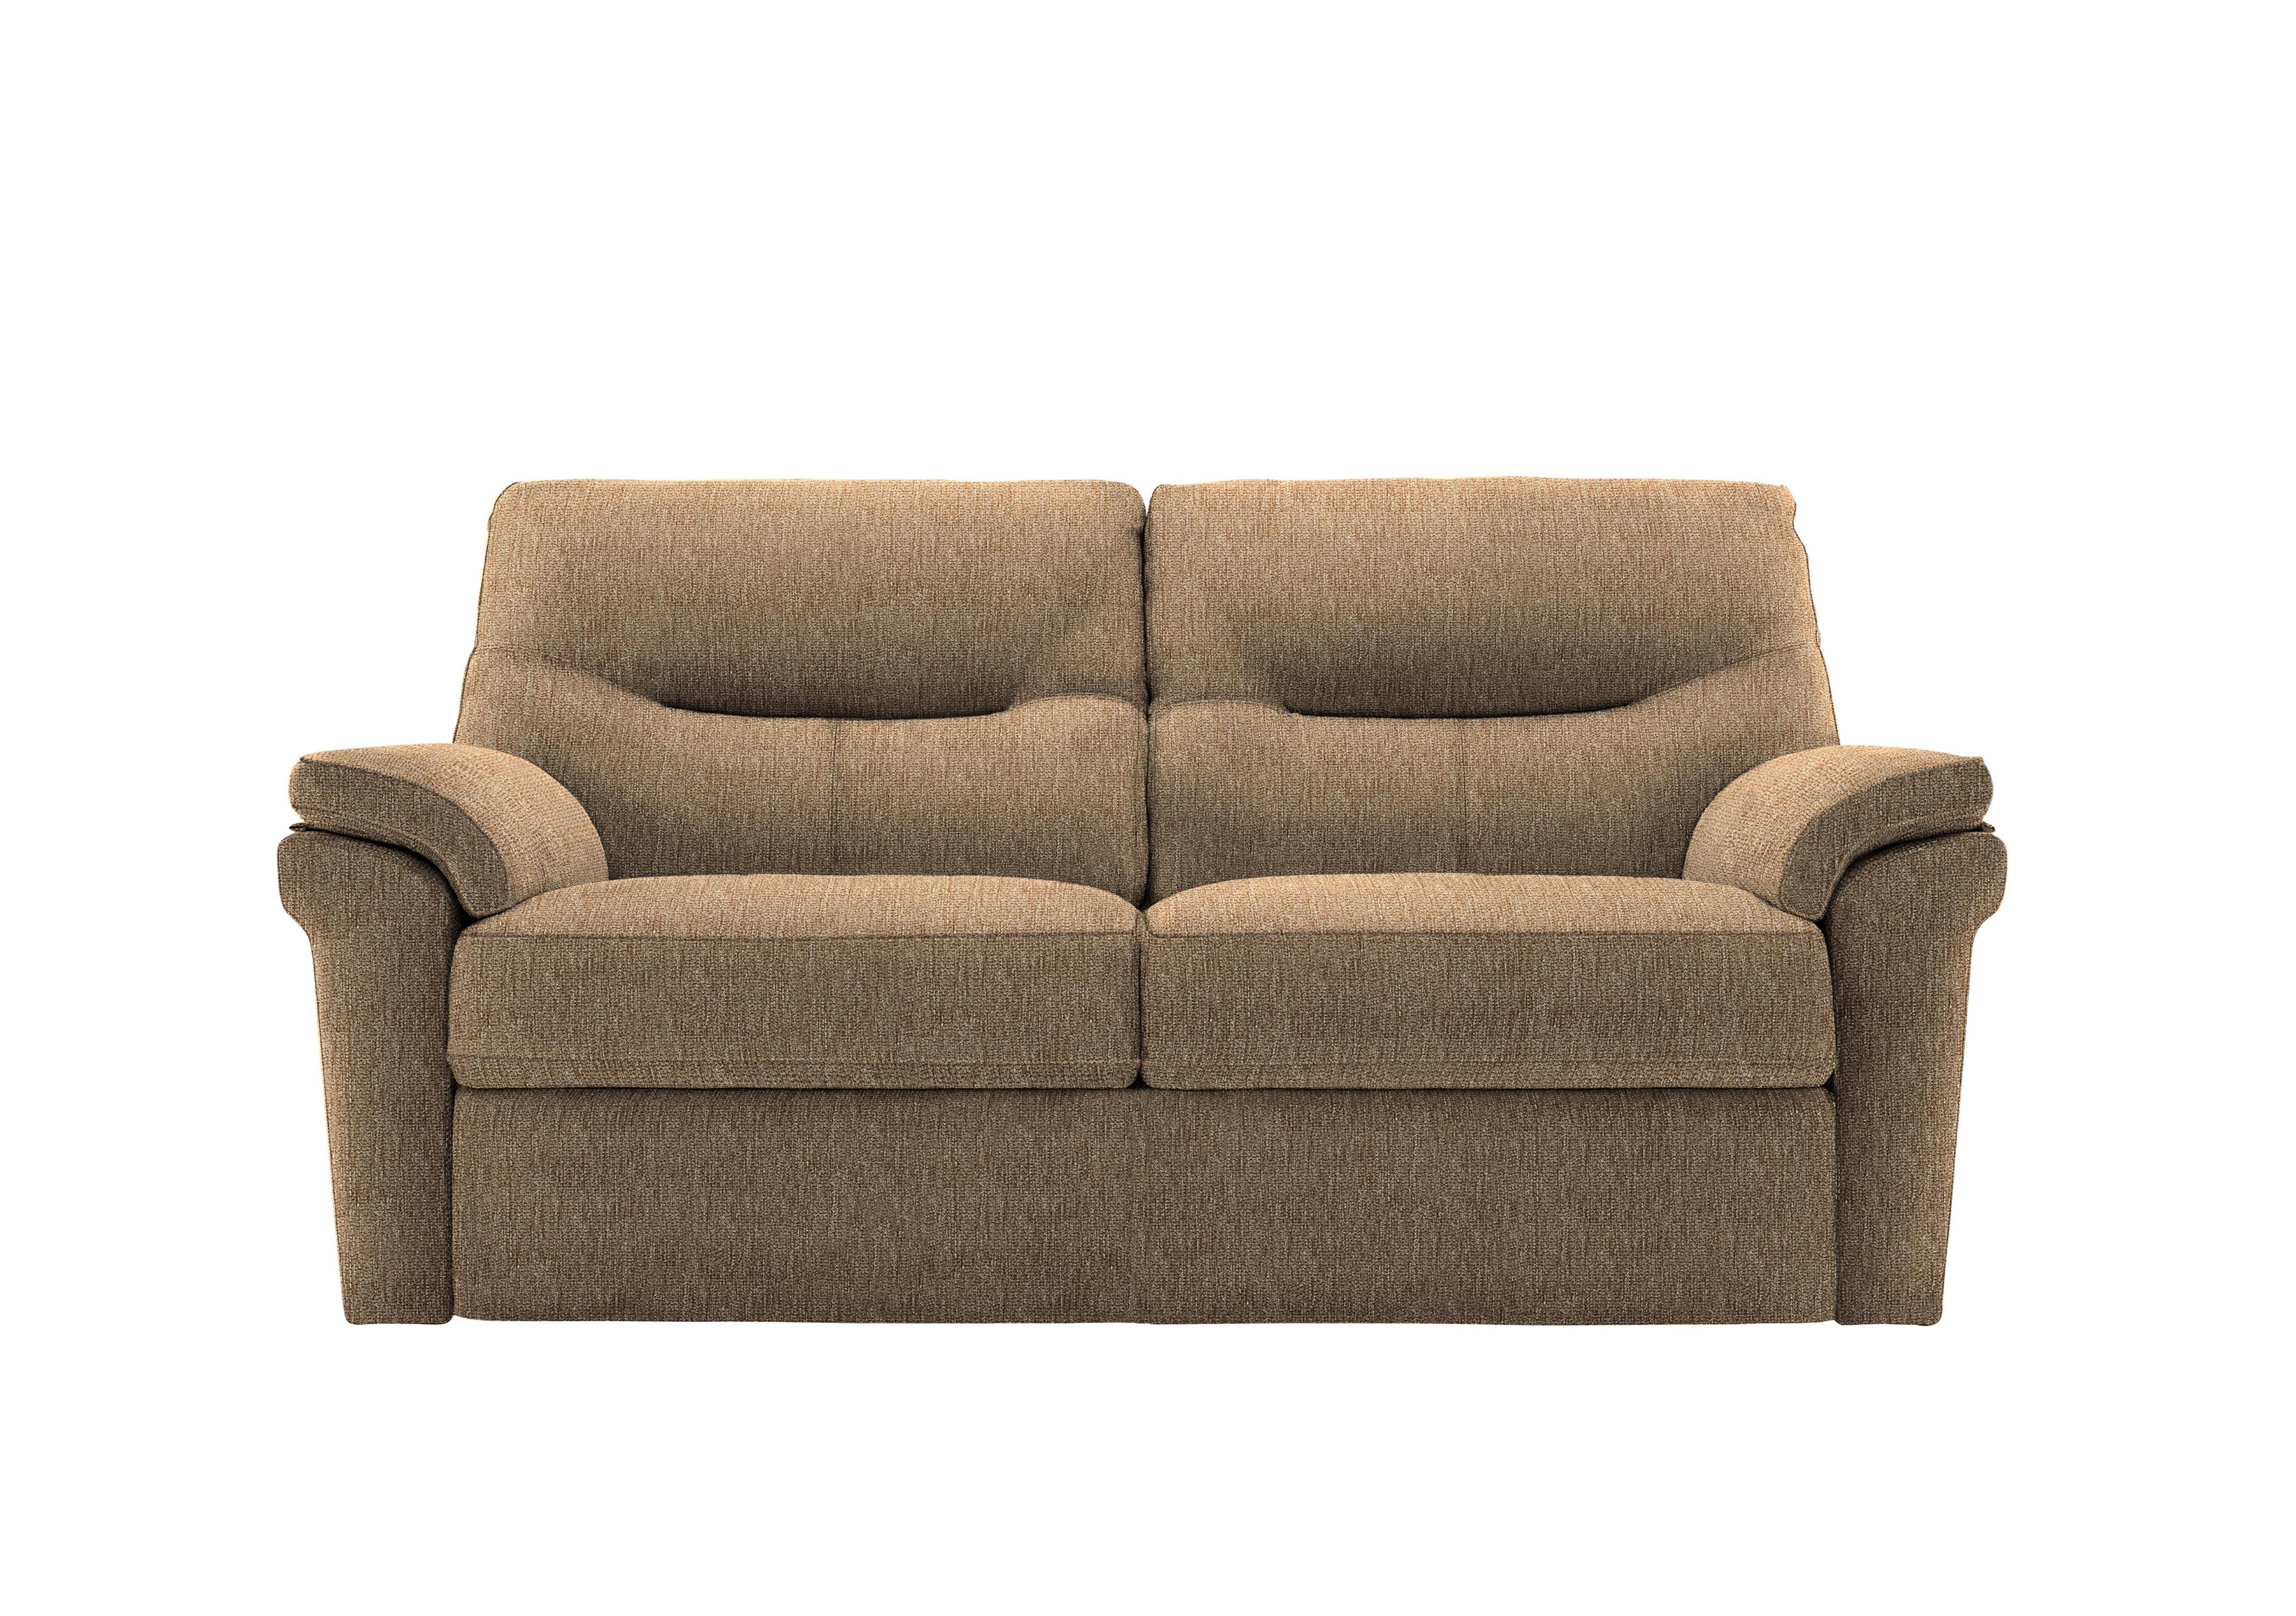 Seattle 2.5 Seater Fabric Sofa in A070 Boucle Cocoa on Furniture Village